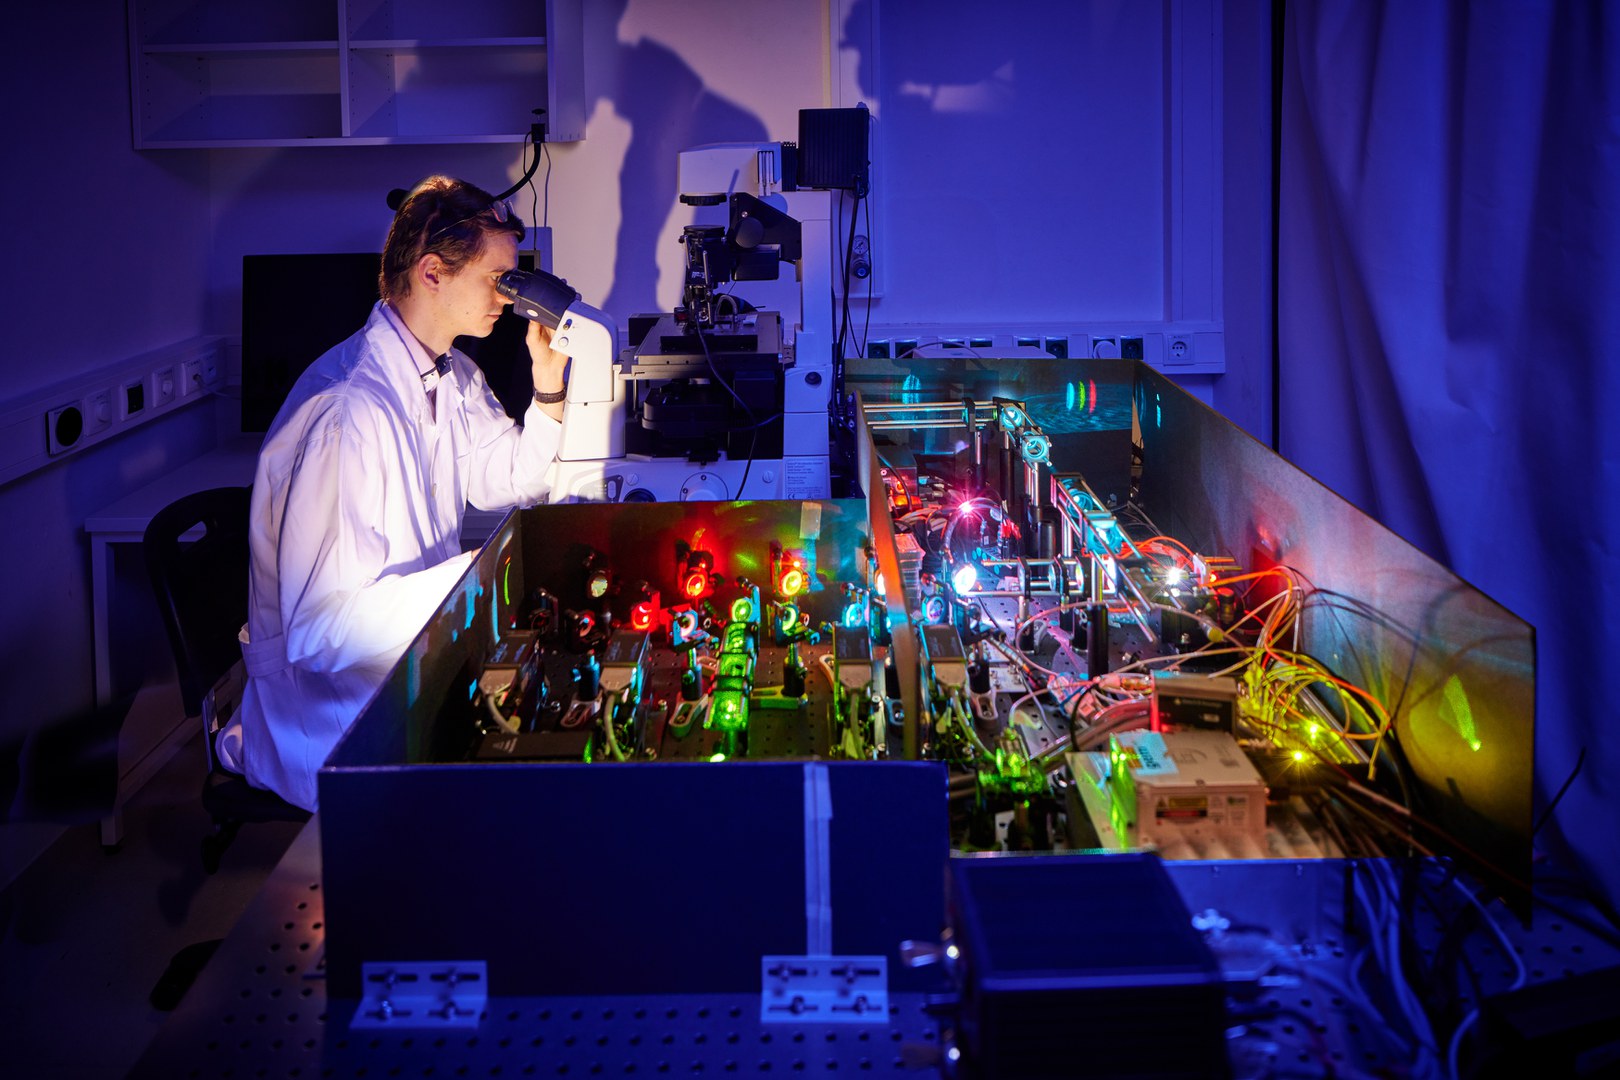 Koen Martens from the Institute for Microbiology and Biotechnology at the University of Bonn working at the custom-built super-resolution fluorescence microscope that he uses for his investigations.